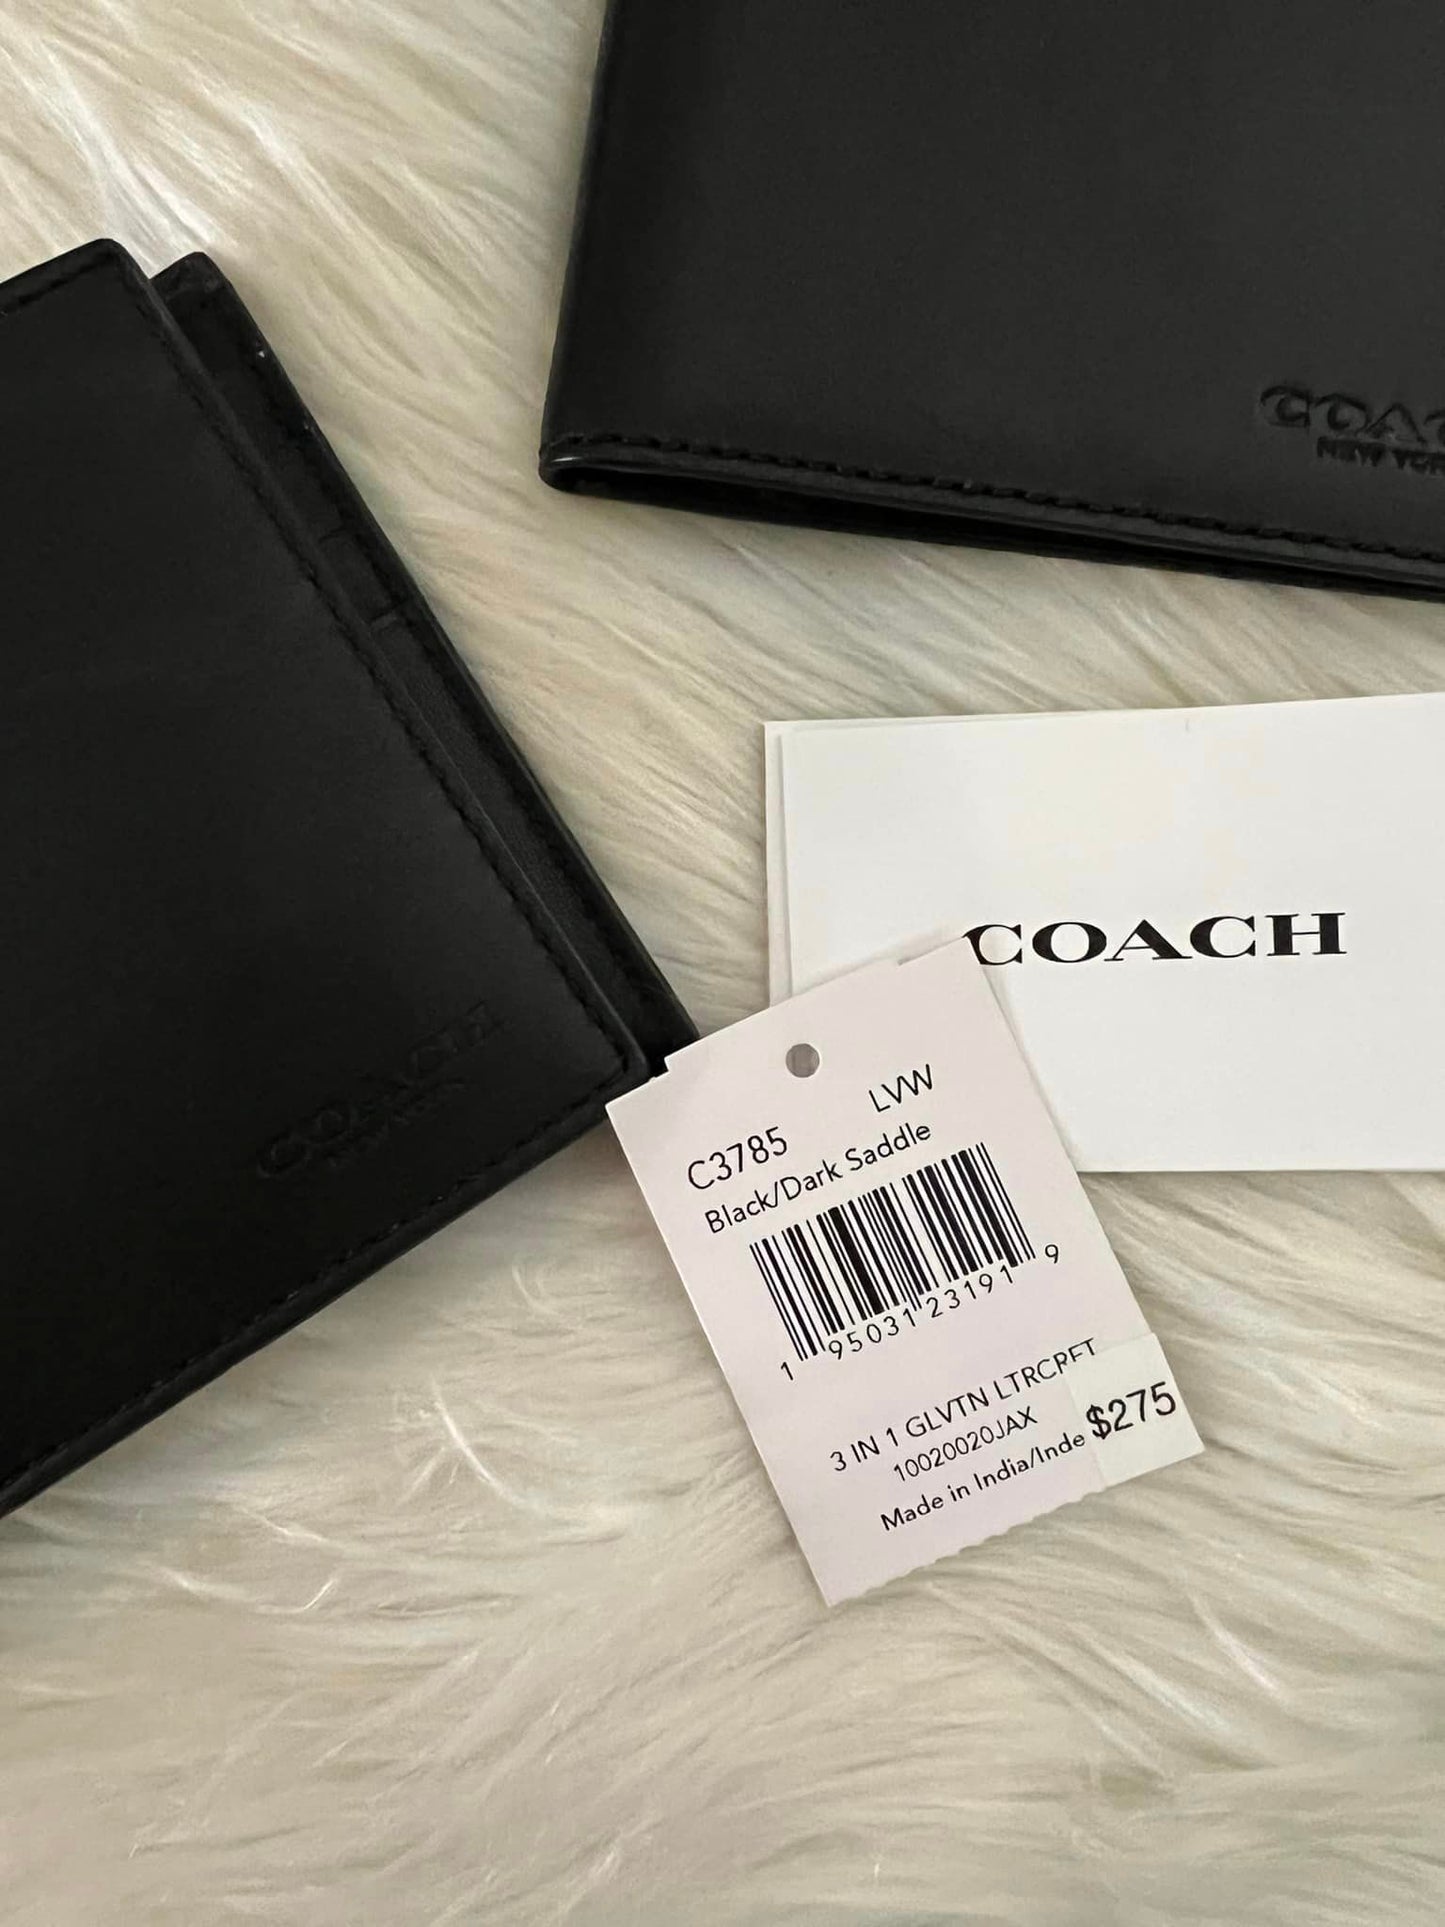 Coach Men’s 3-in-1 Wallet in Colorblock with Whipstitch